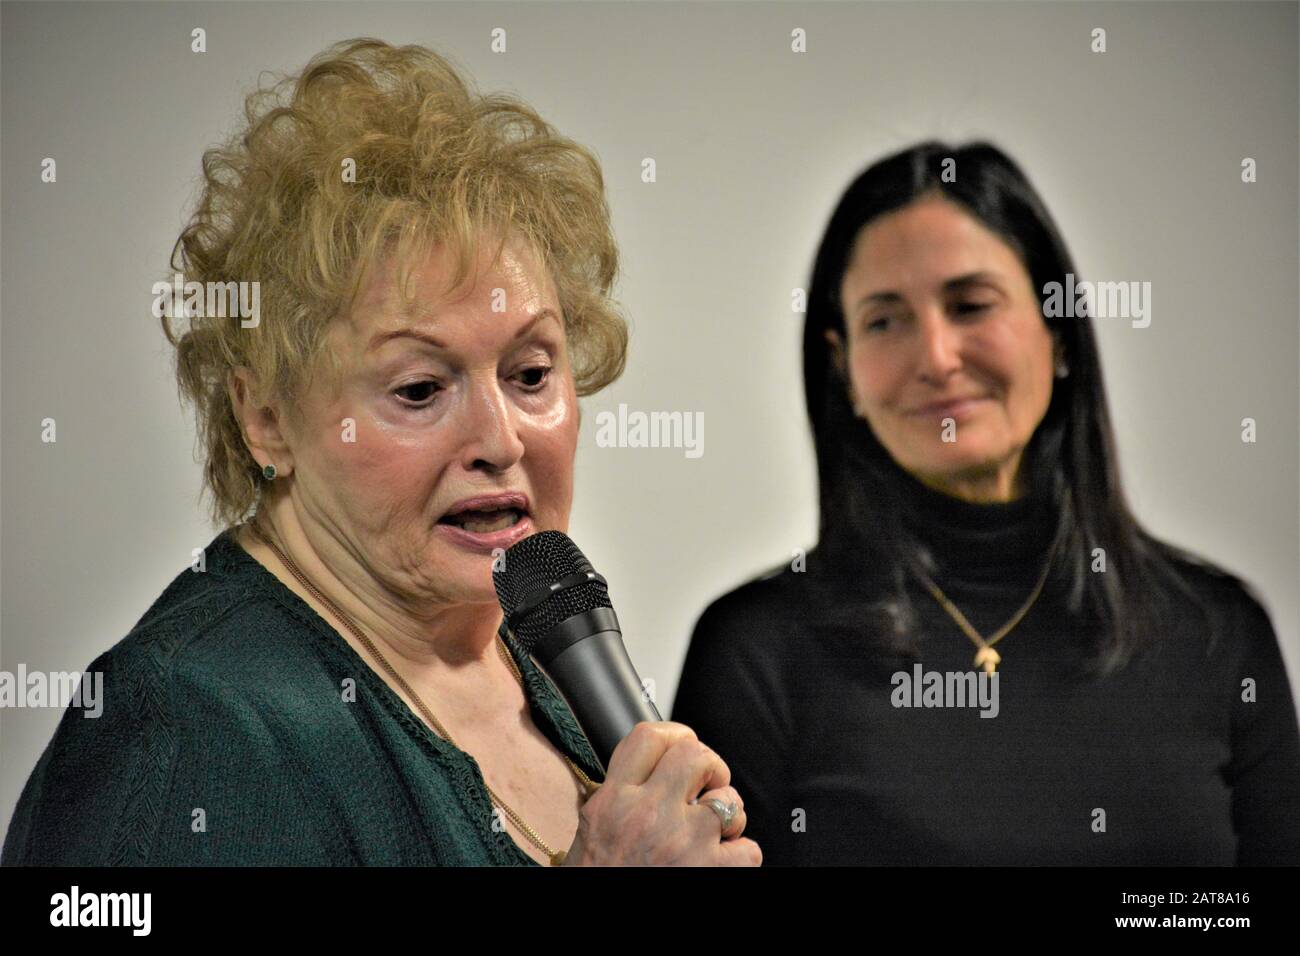 Rita Lurie (1937-) Author, Holocaust survivor from Poland, Los Angeles and Leslie Gilbert-Lurie; NBC exe. Leader, philanthropist - background Stock Photo